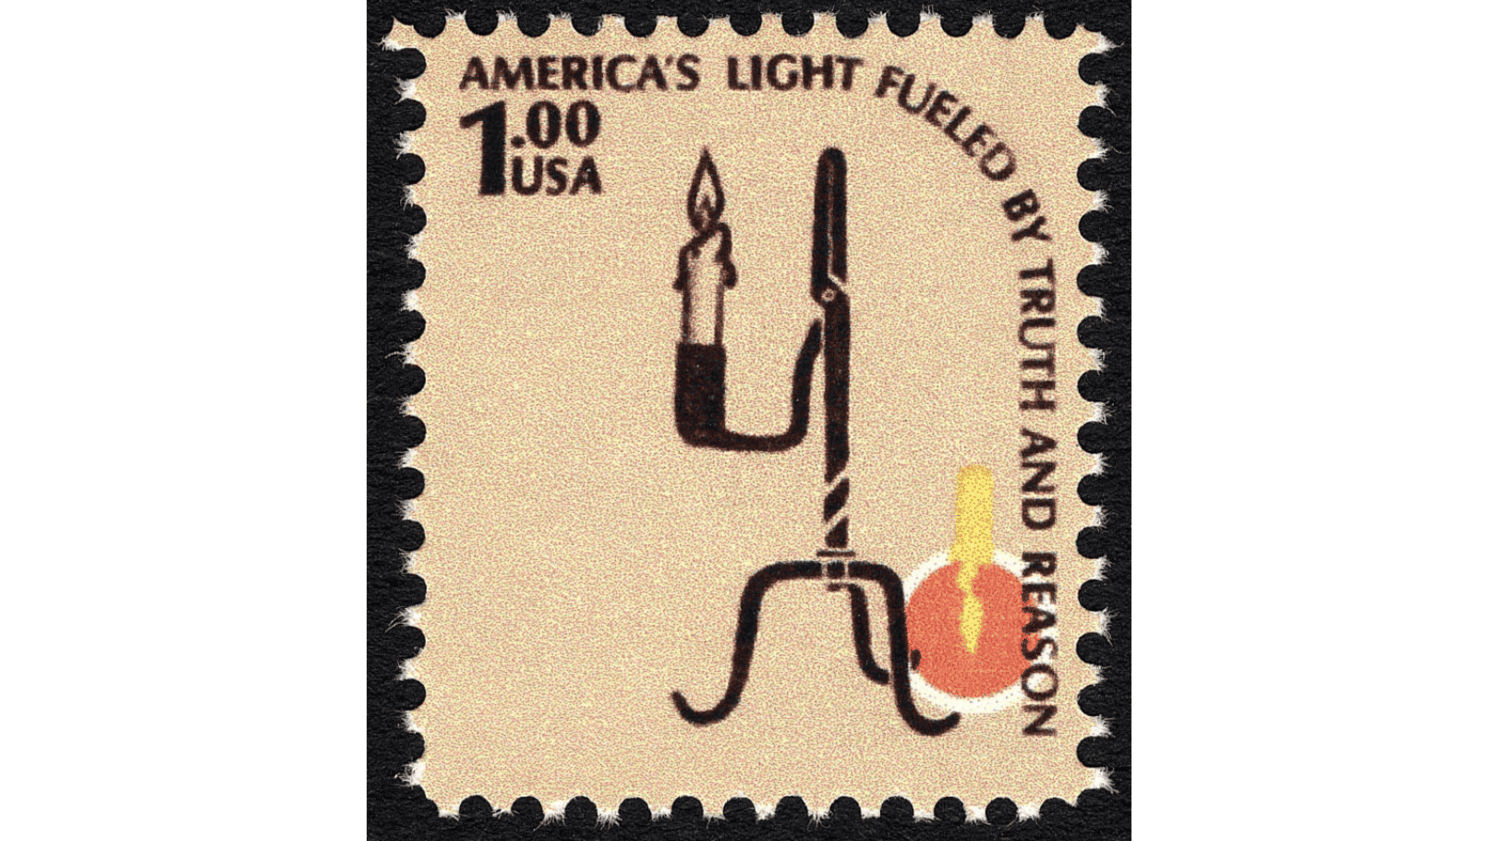 $1 postage stamp displaying a candle rush lamp and the text "America's light fueled by truth and reason"